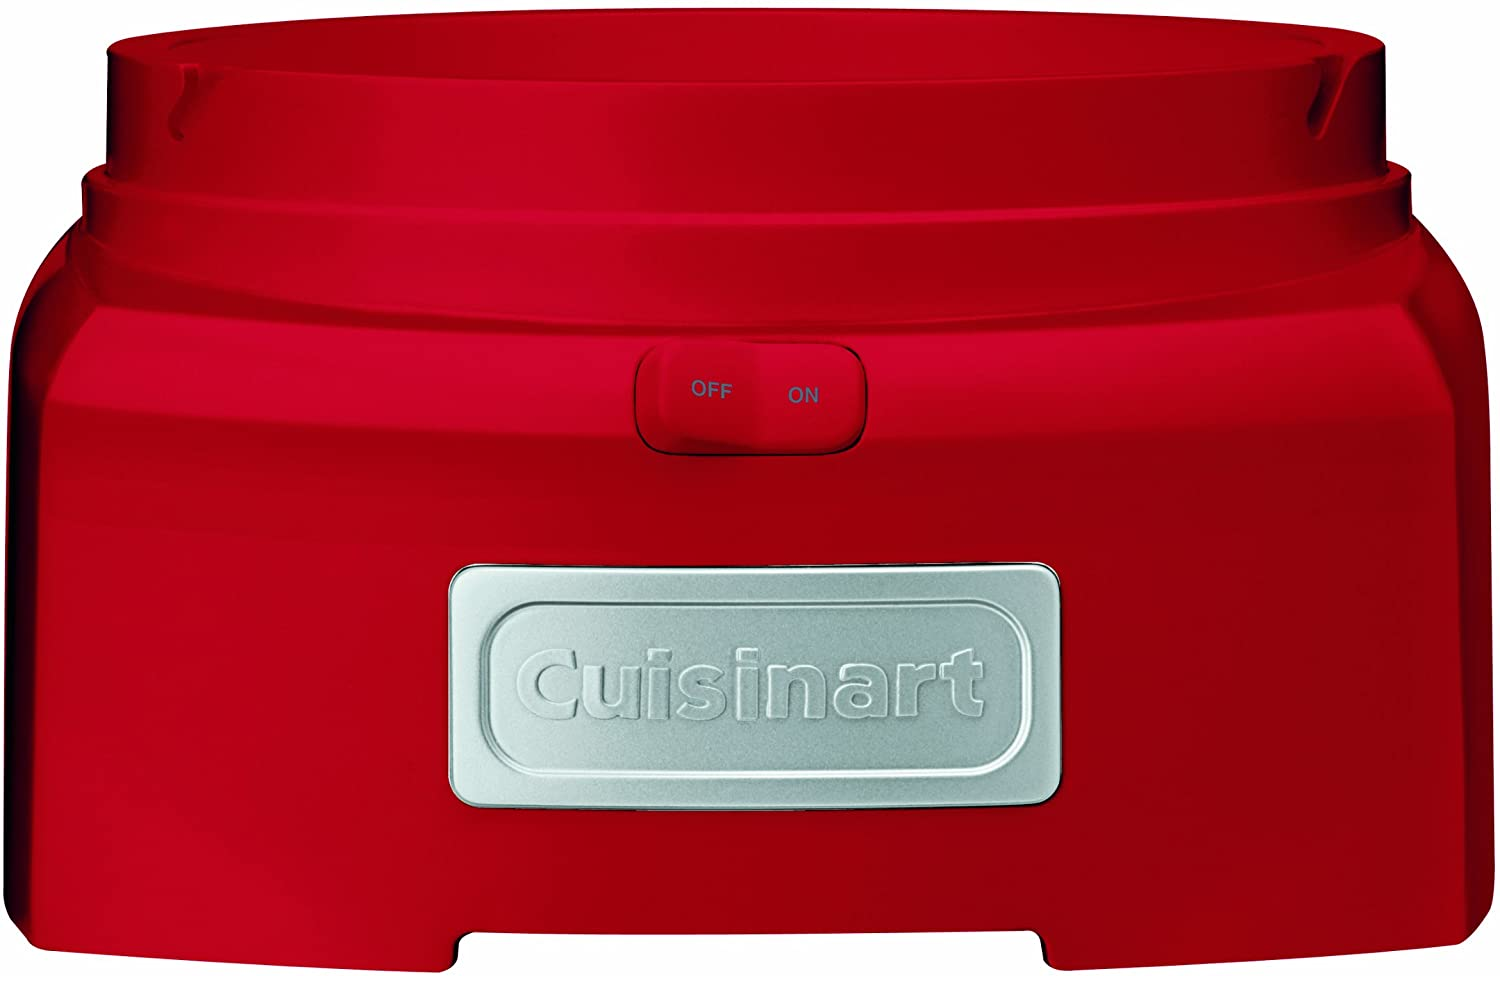 Cuisinart ICE21R Frozen Yogurt Automatic Ice Cream and Sorbet Maker,120 V, Thermoplastic, 1-1/2 qt, Red 